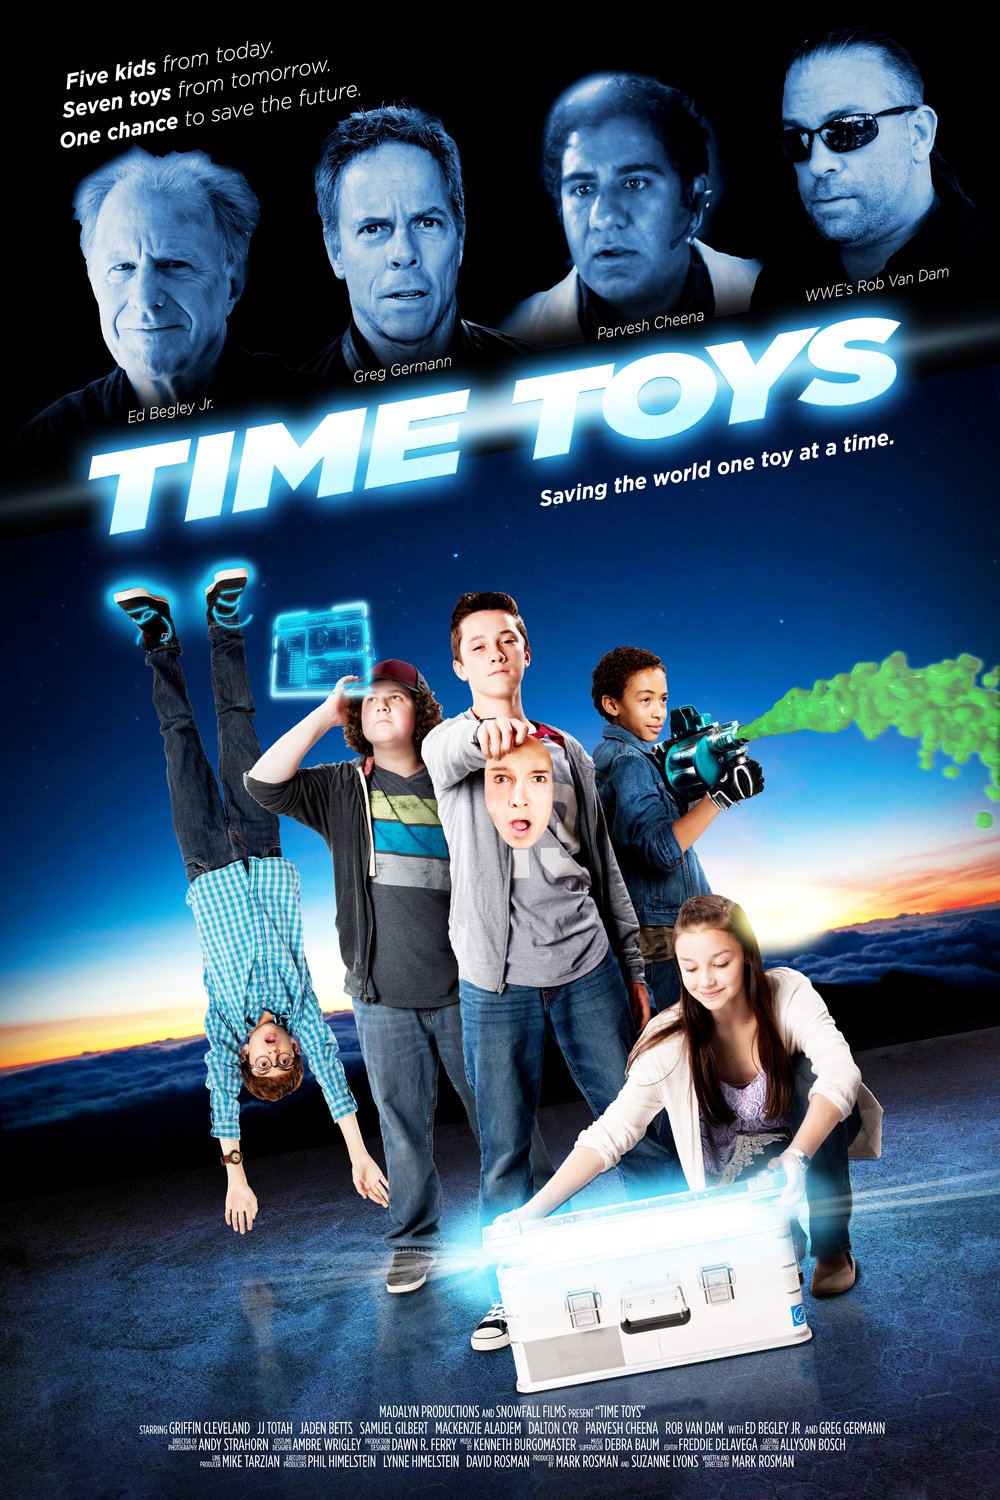 Poster of the movie Time Toys